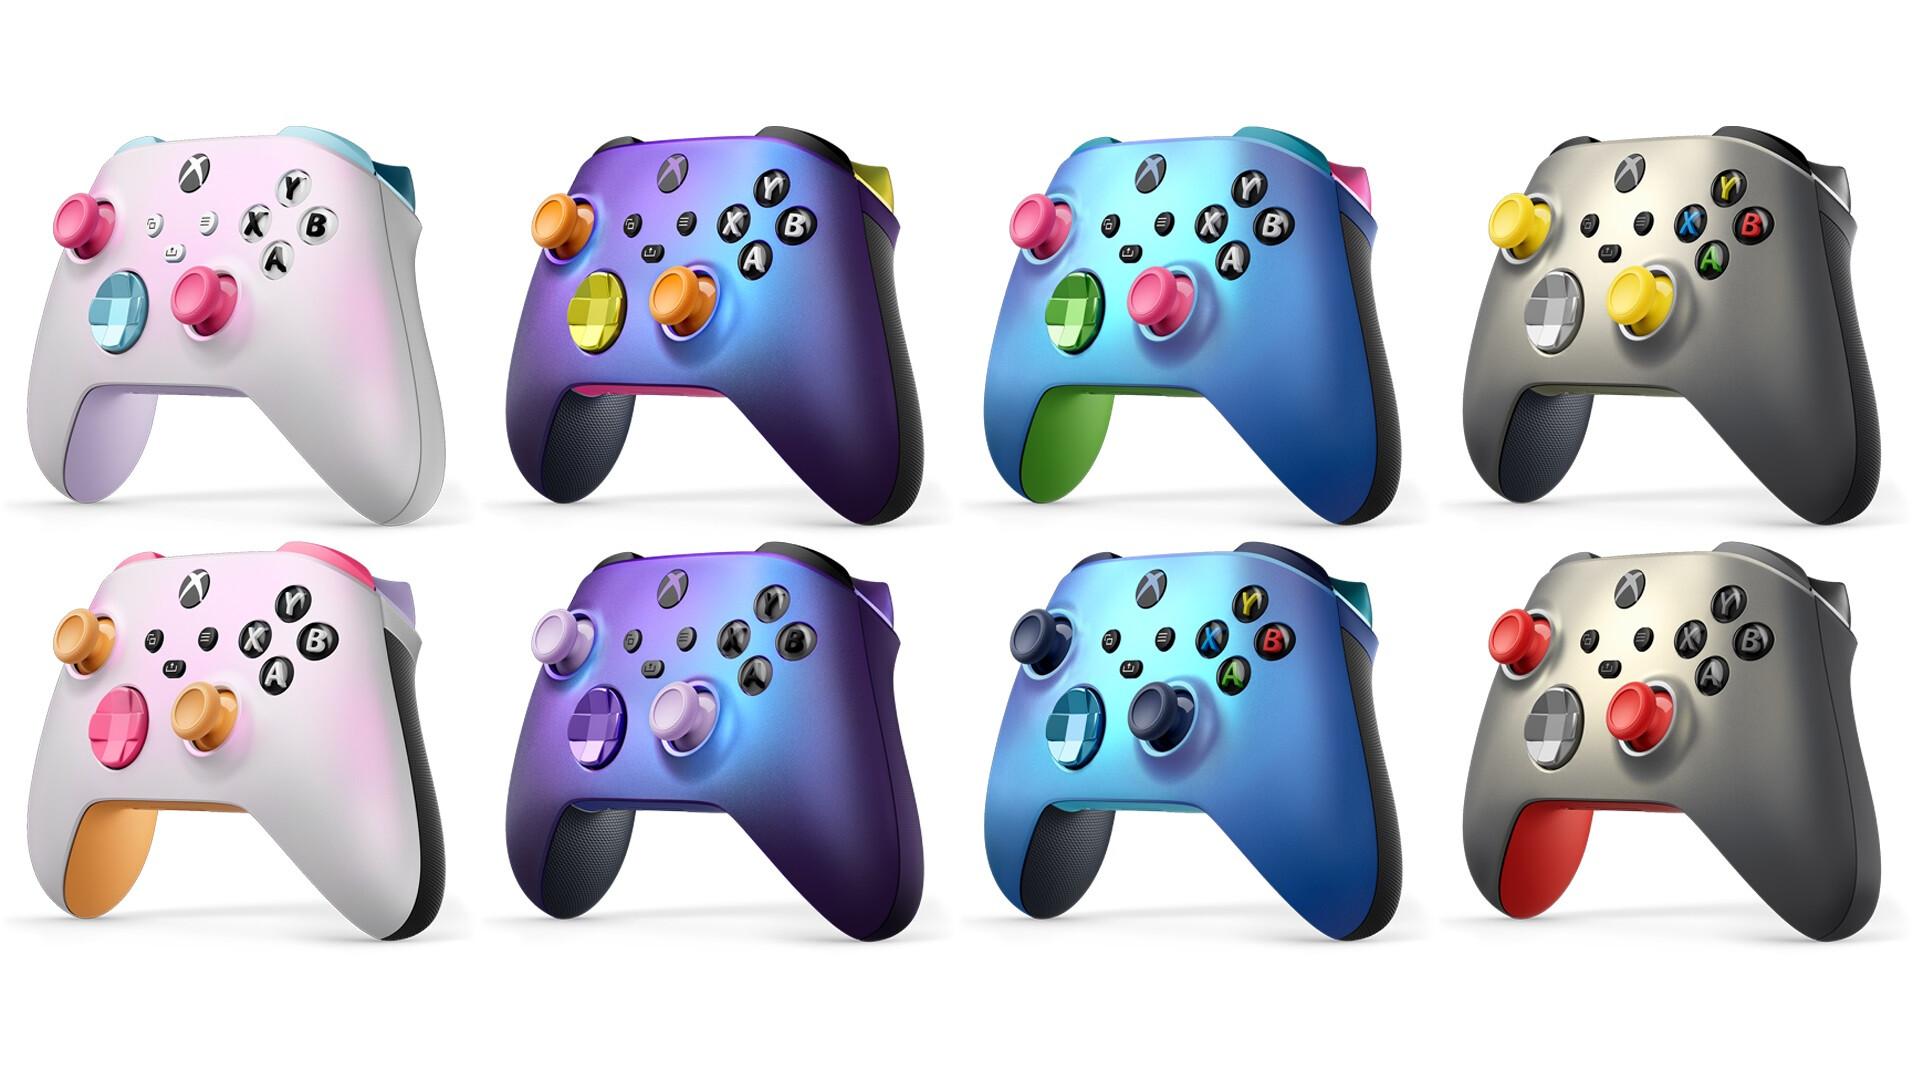 Bite Back! Introducing Redfall Limited Edition Controllers with Xbox Design  Lab - Xbox Wire